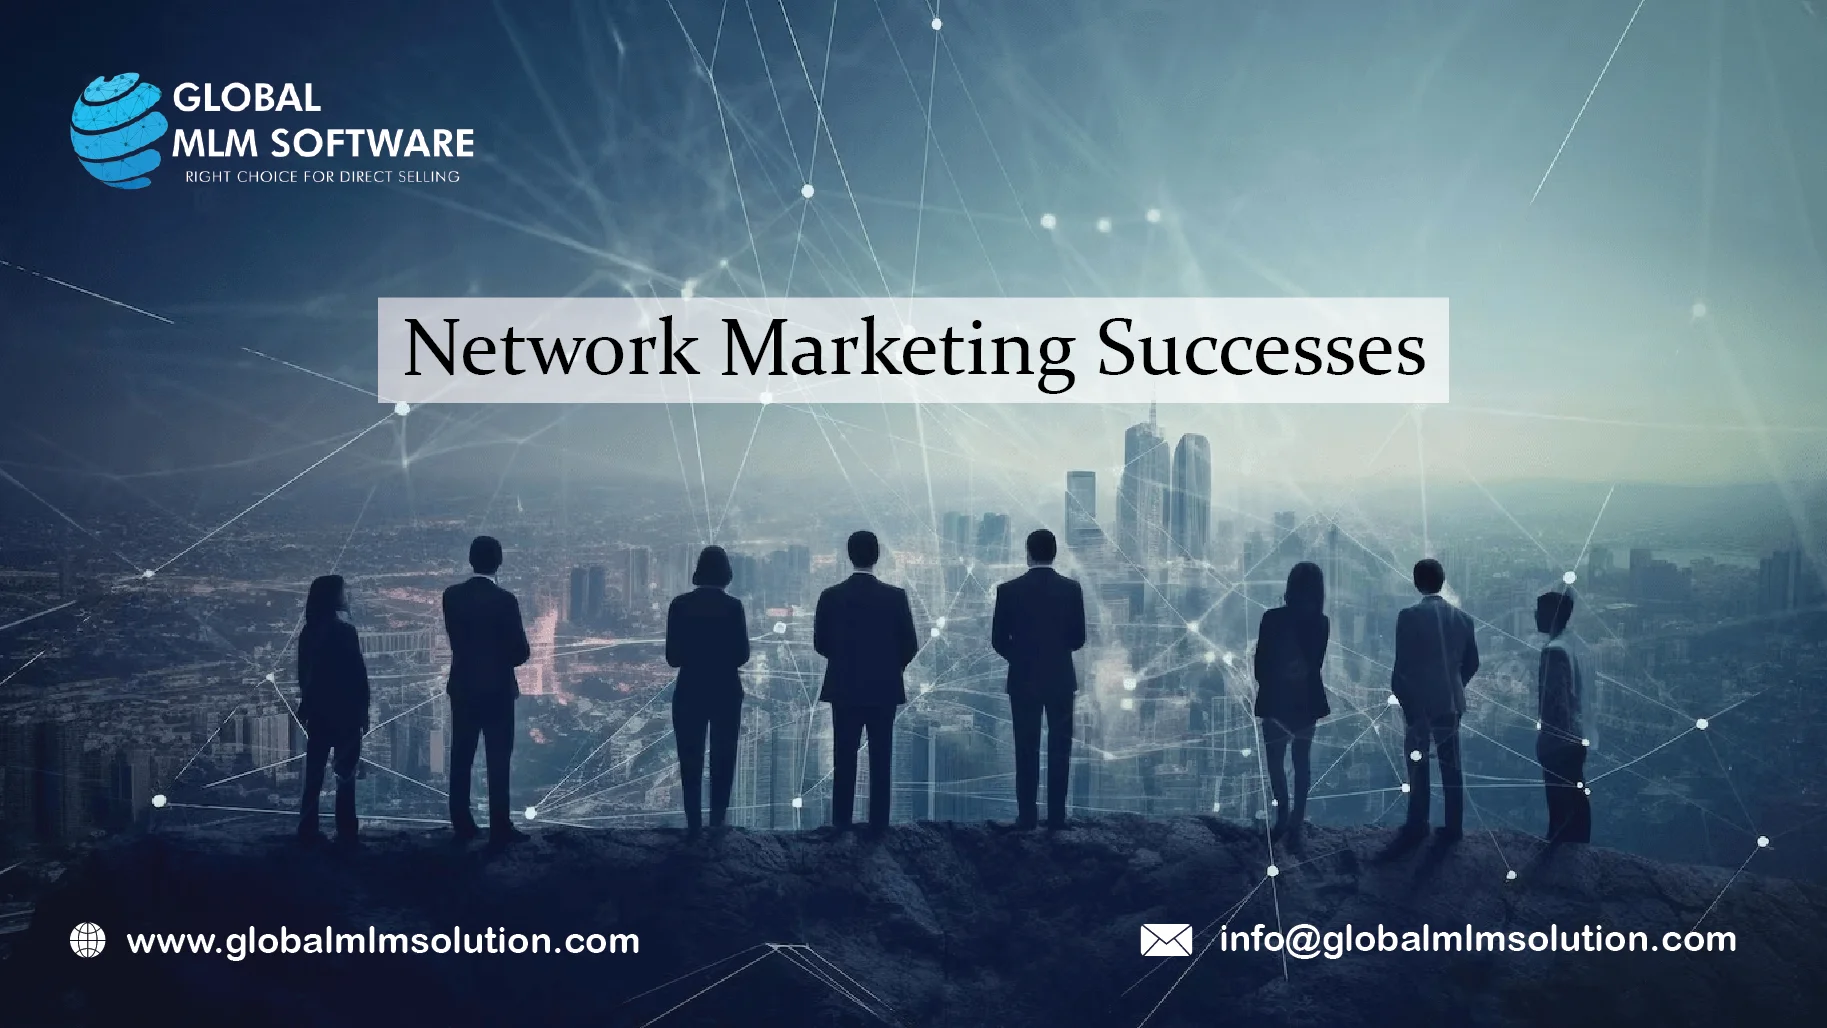 Network Marketing Successes: 10 Inspiring Stories To Fuel Your Ambition